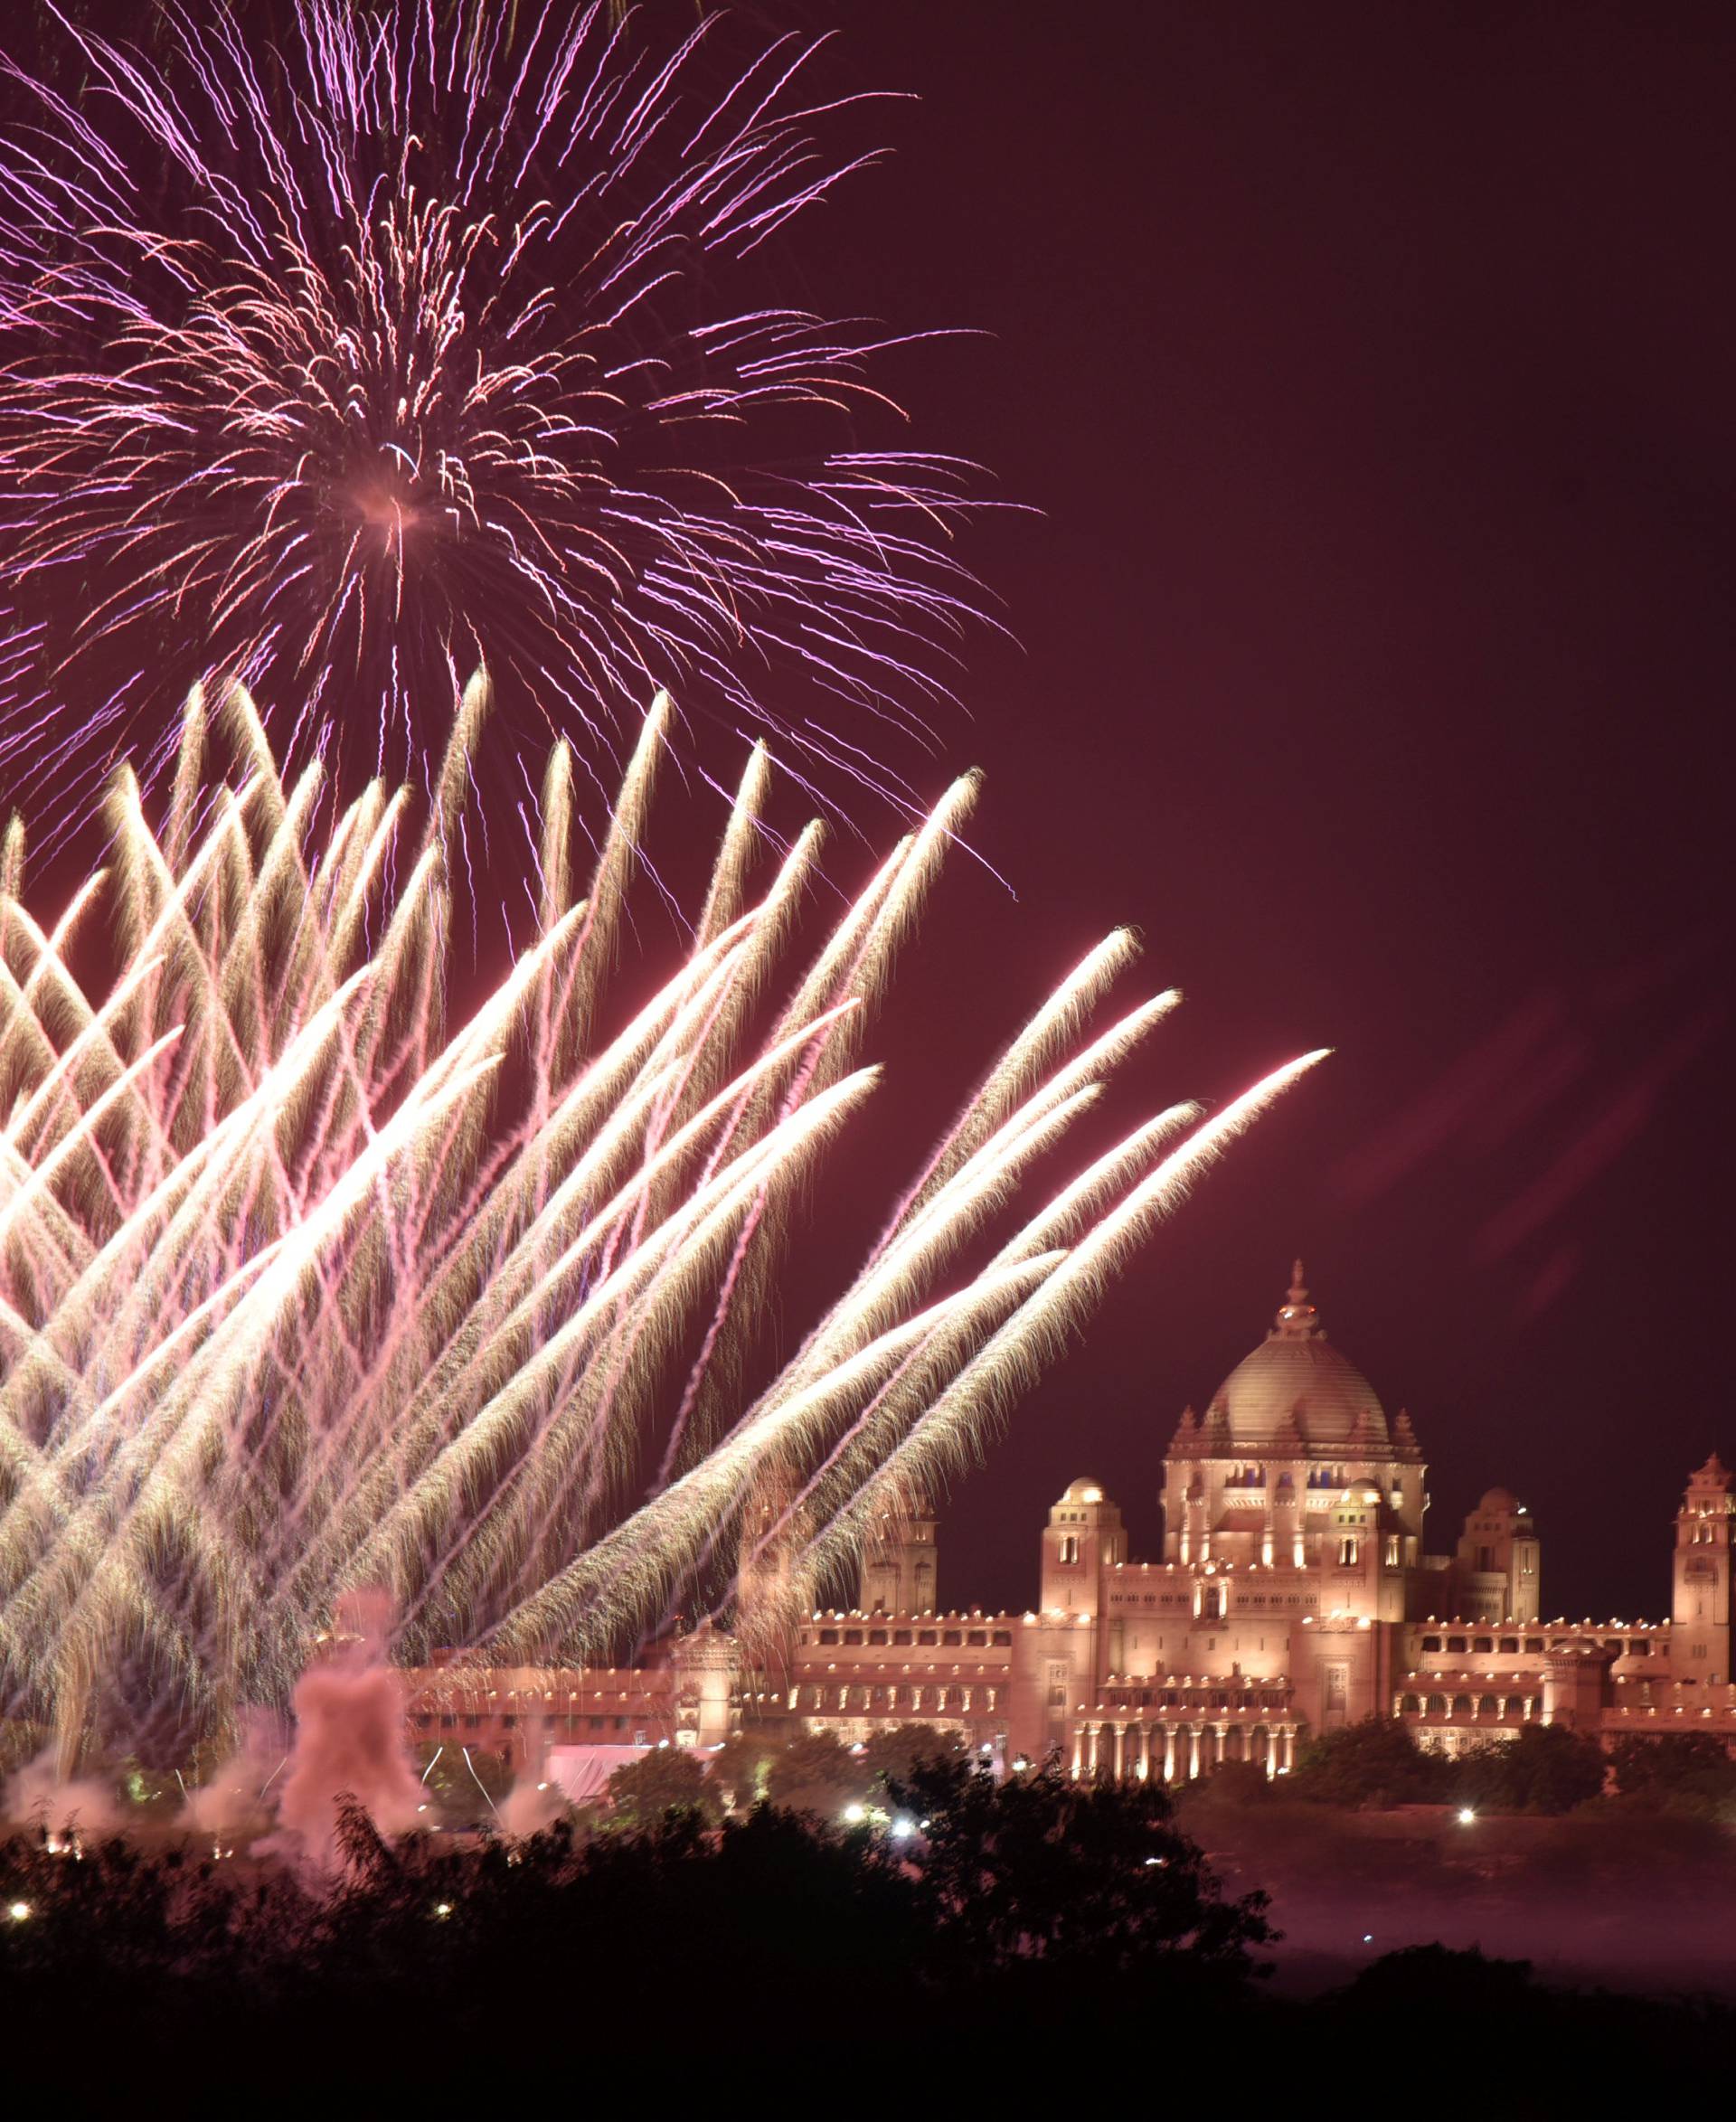 Fireworks explode in the sky over Umaid Bhawan Palace, the venue for the wedding of actress Priyanka Chopra and singer Nick Jonas, in Jodhpur